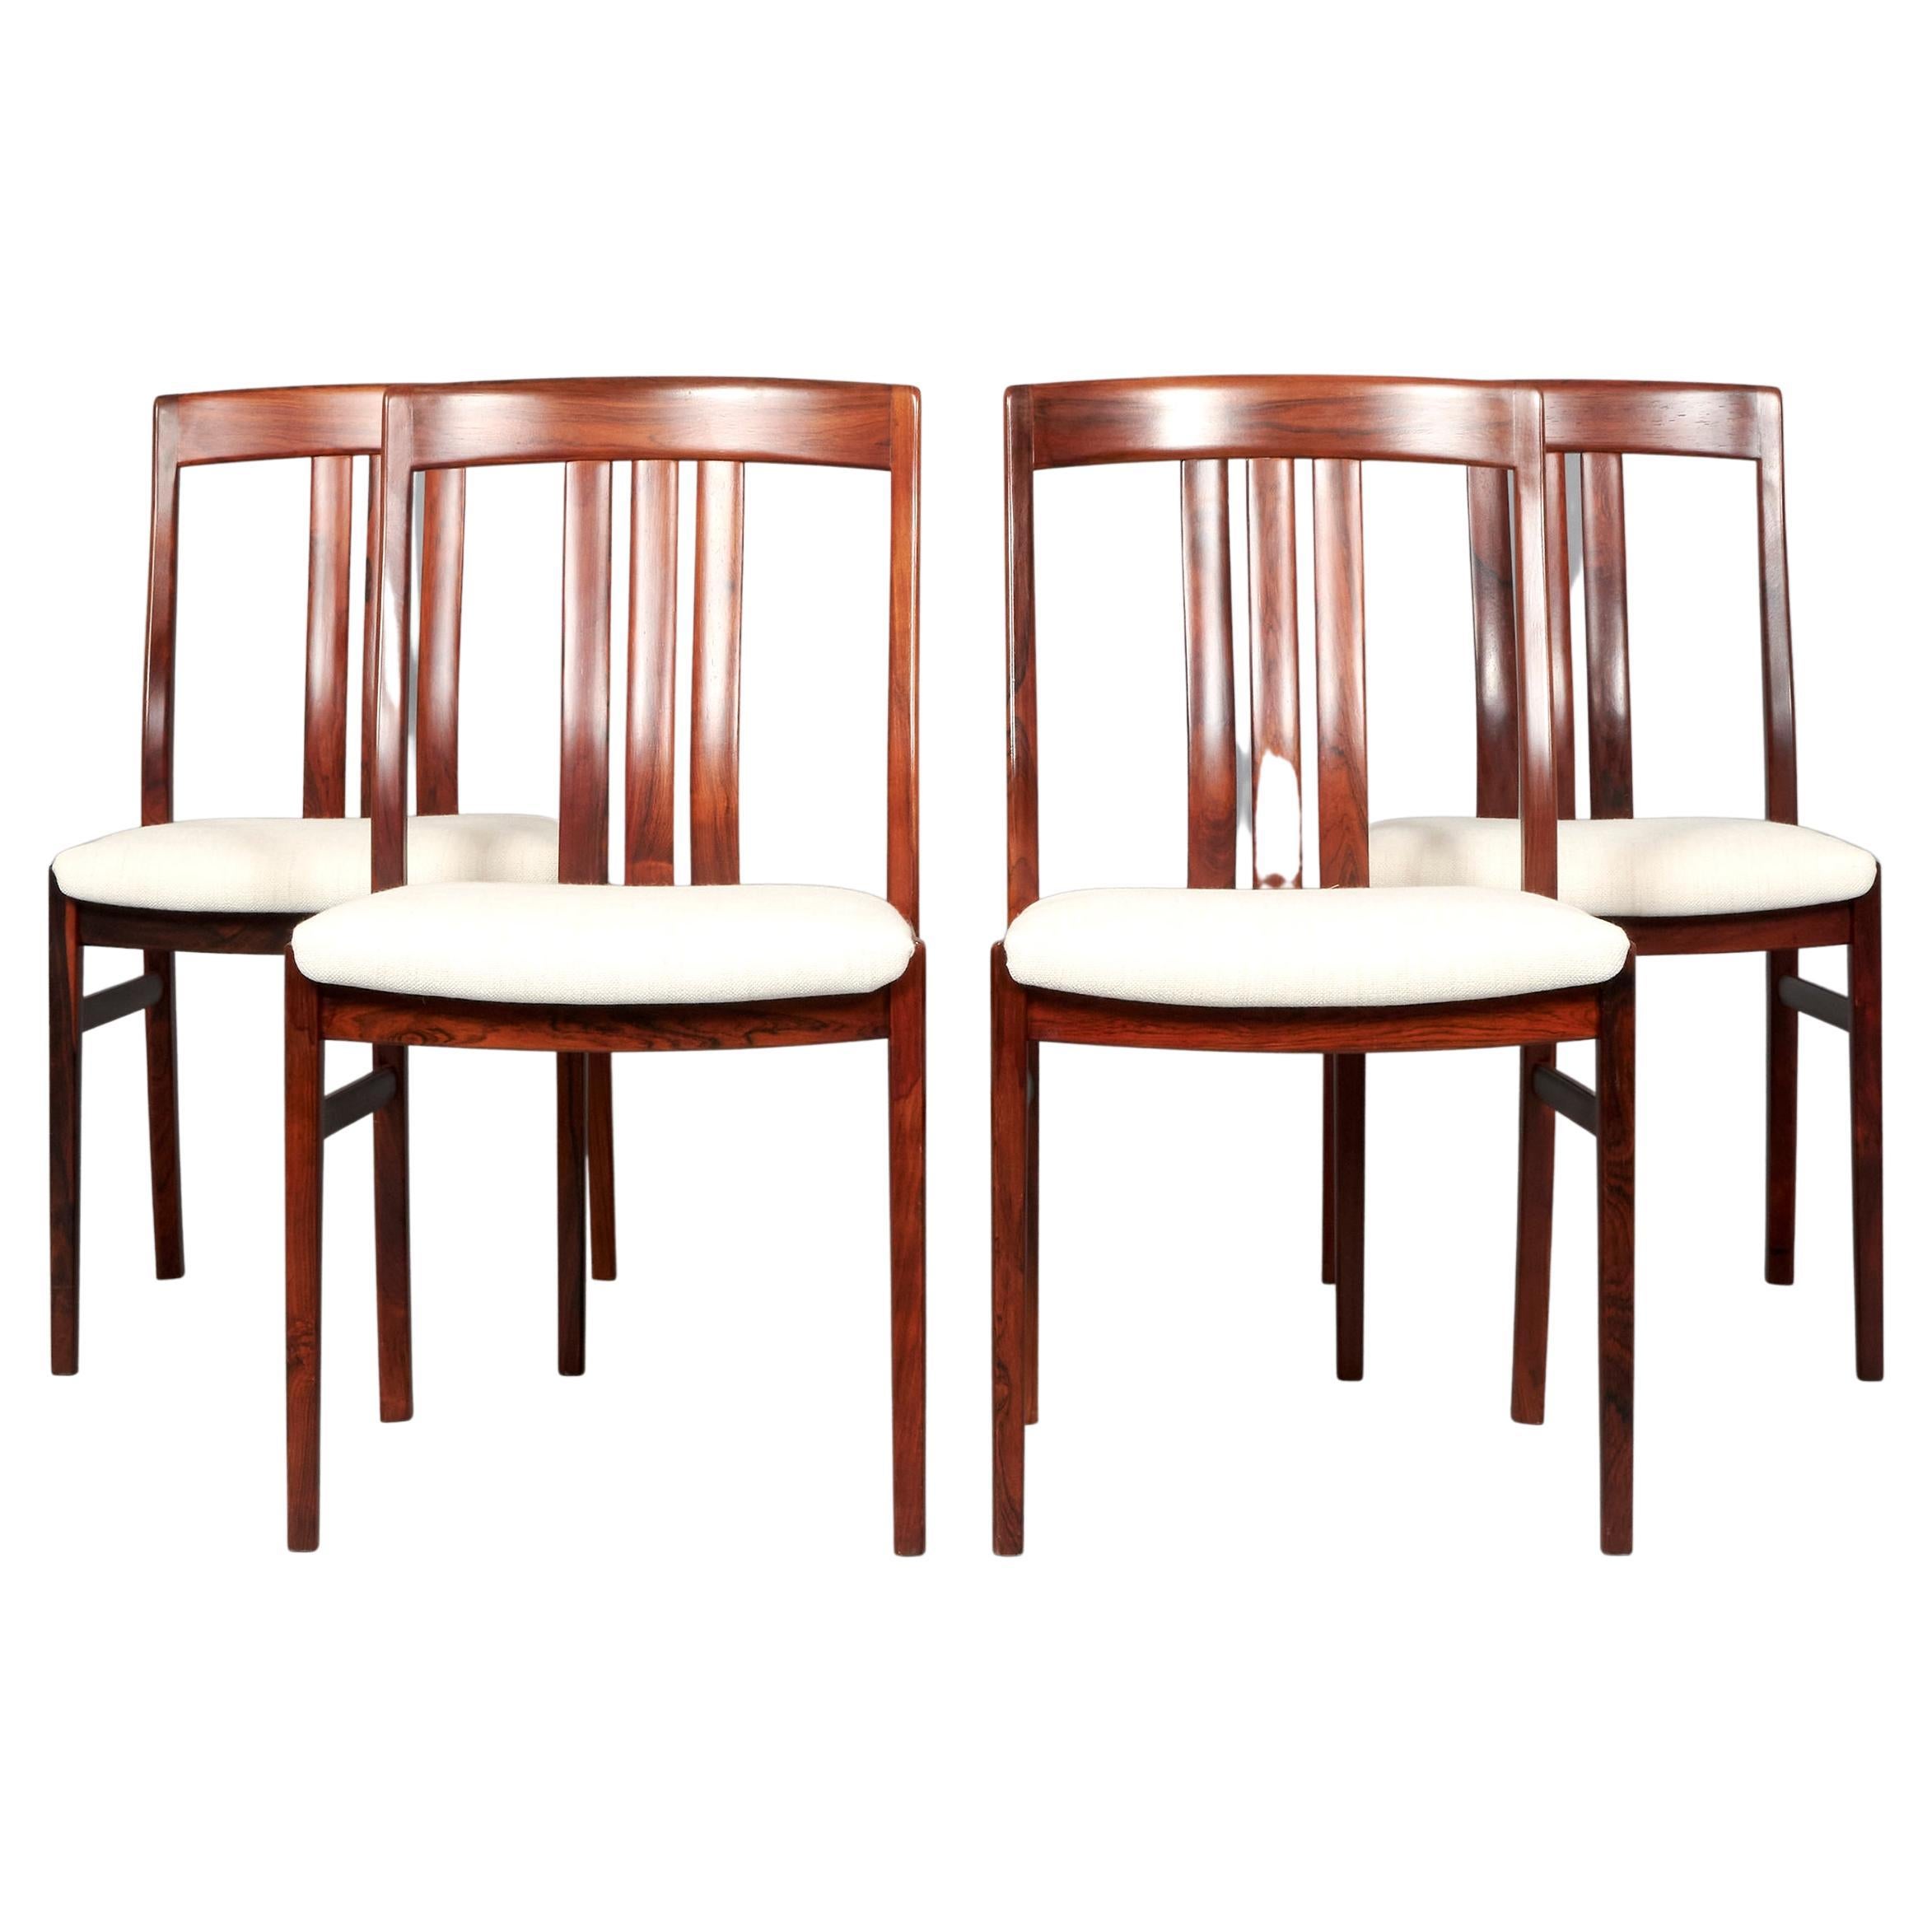 Mid-century modern Rosewood Dining Chairs set